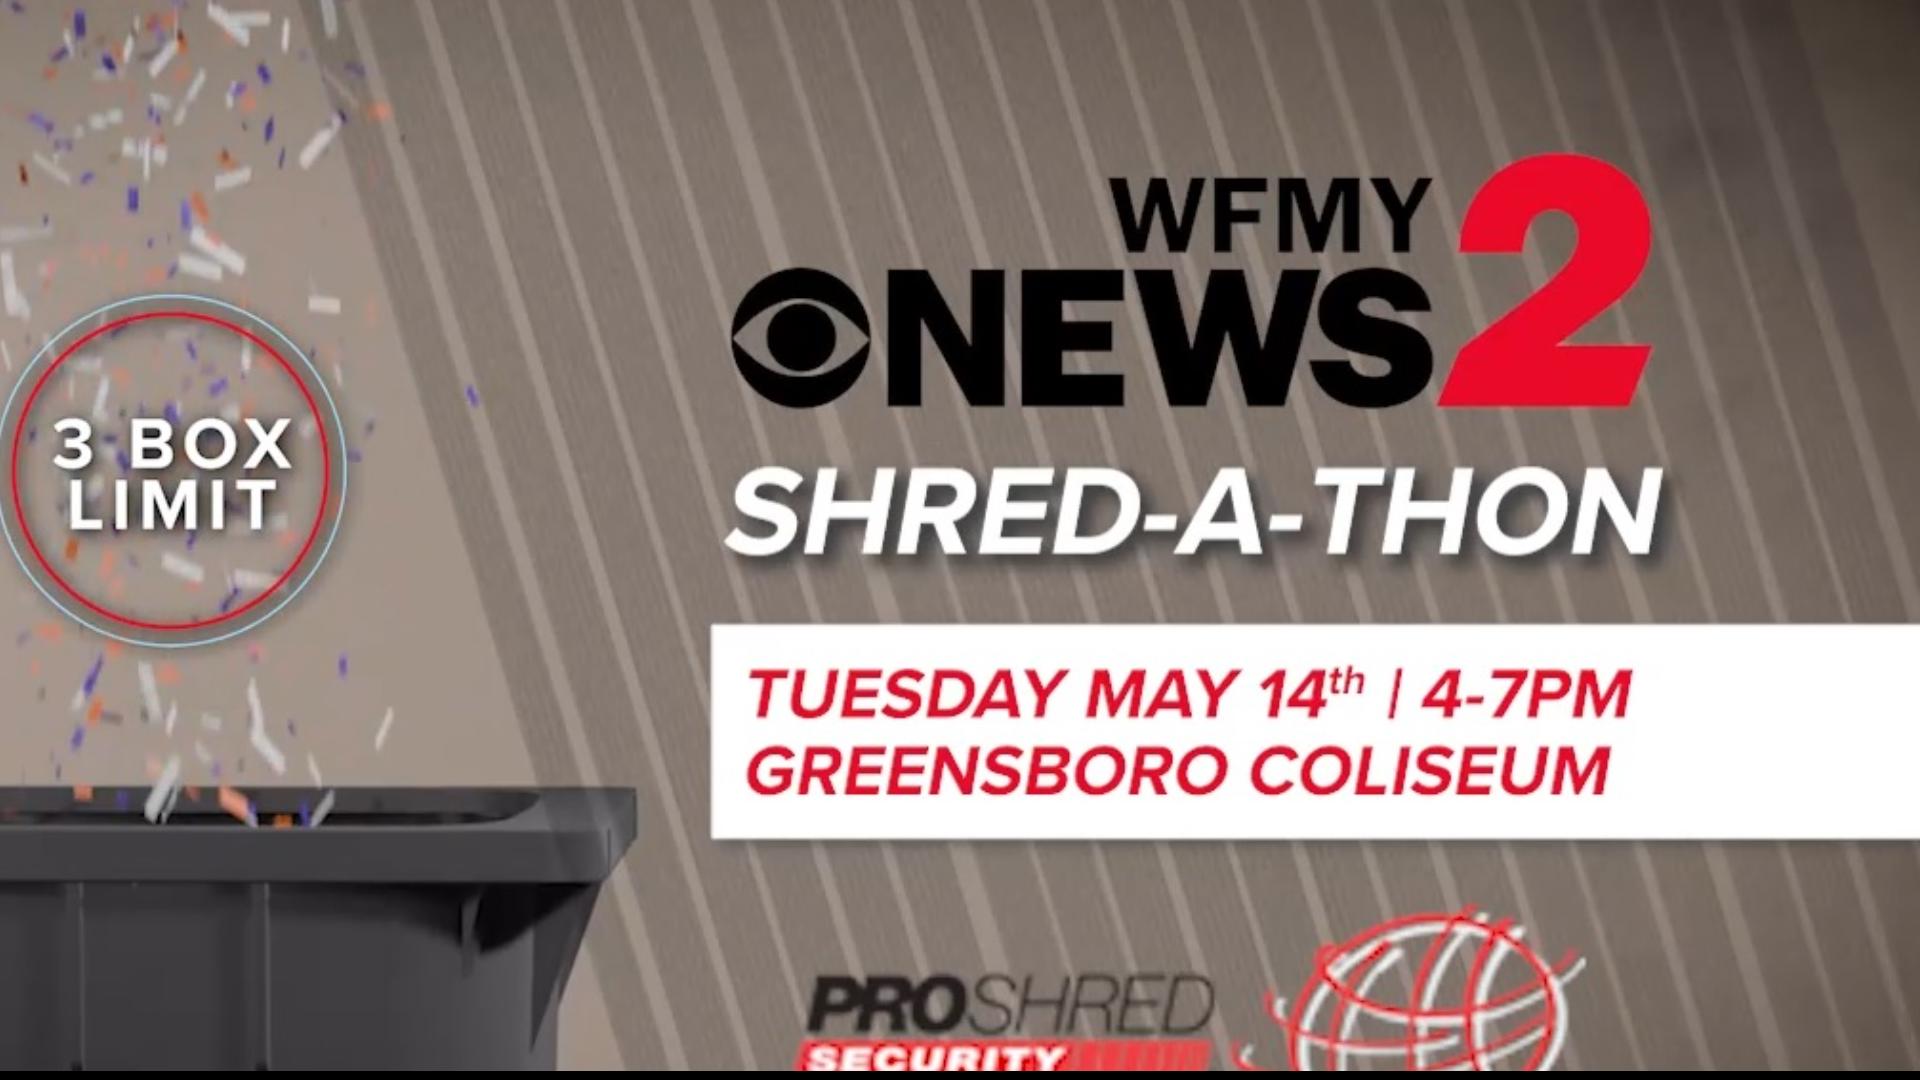 You can shred your private info at the WFMY News 2 Shred-a-thon.